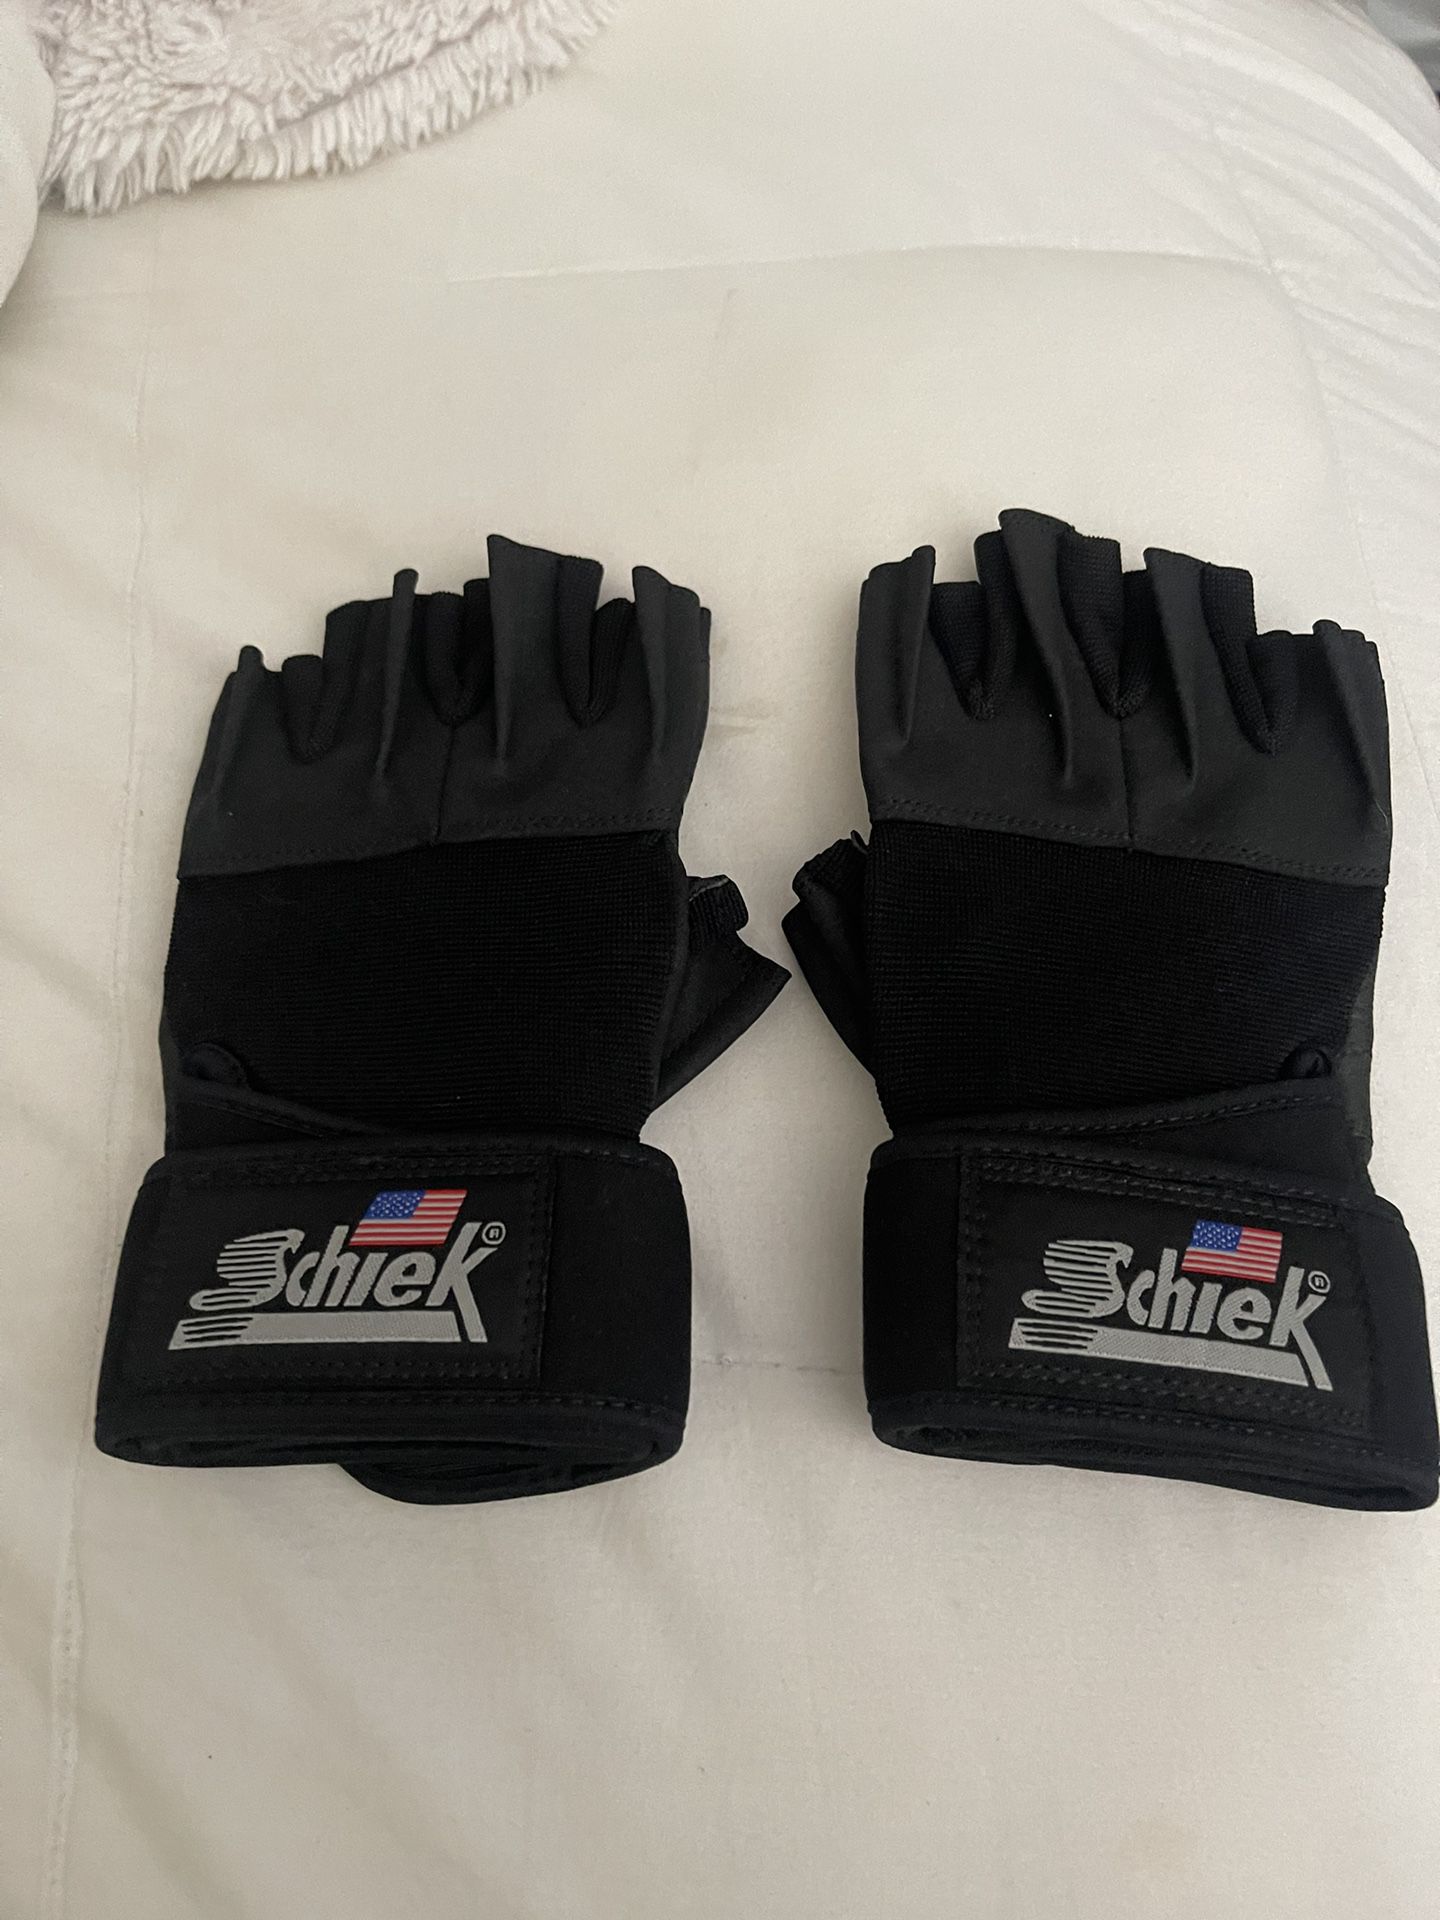 MODEL 540 LIFTING GLOVES WITH WRIST WRAPS